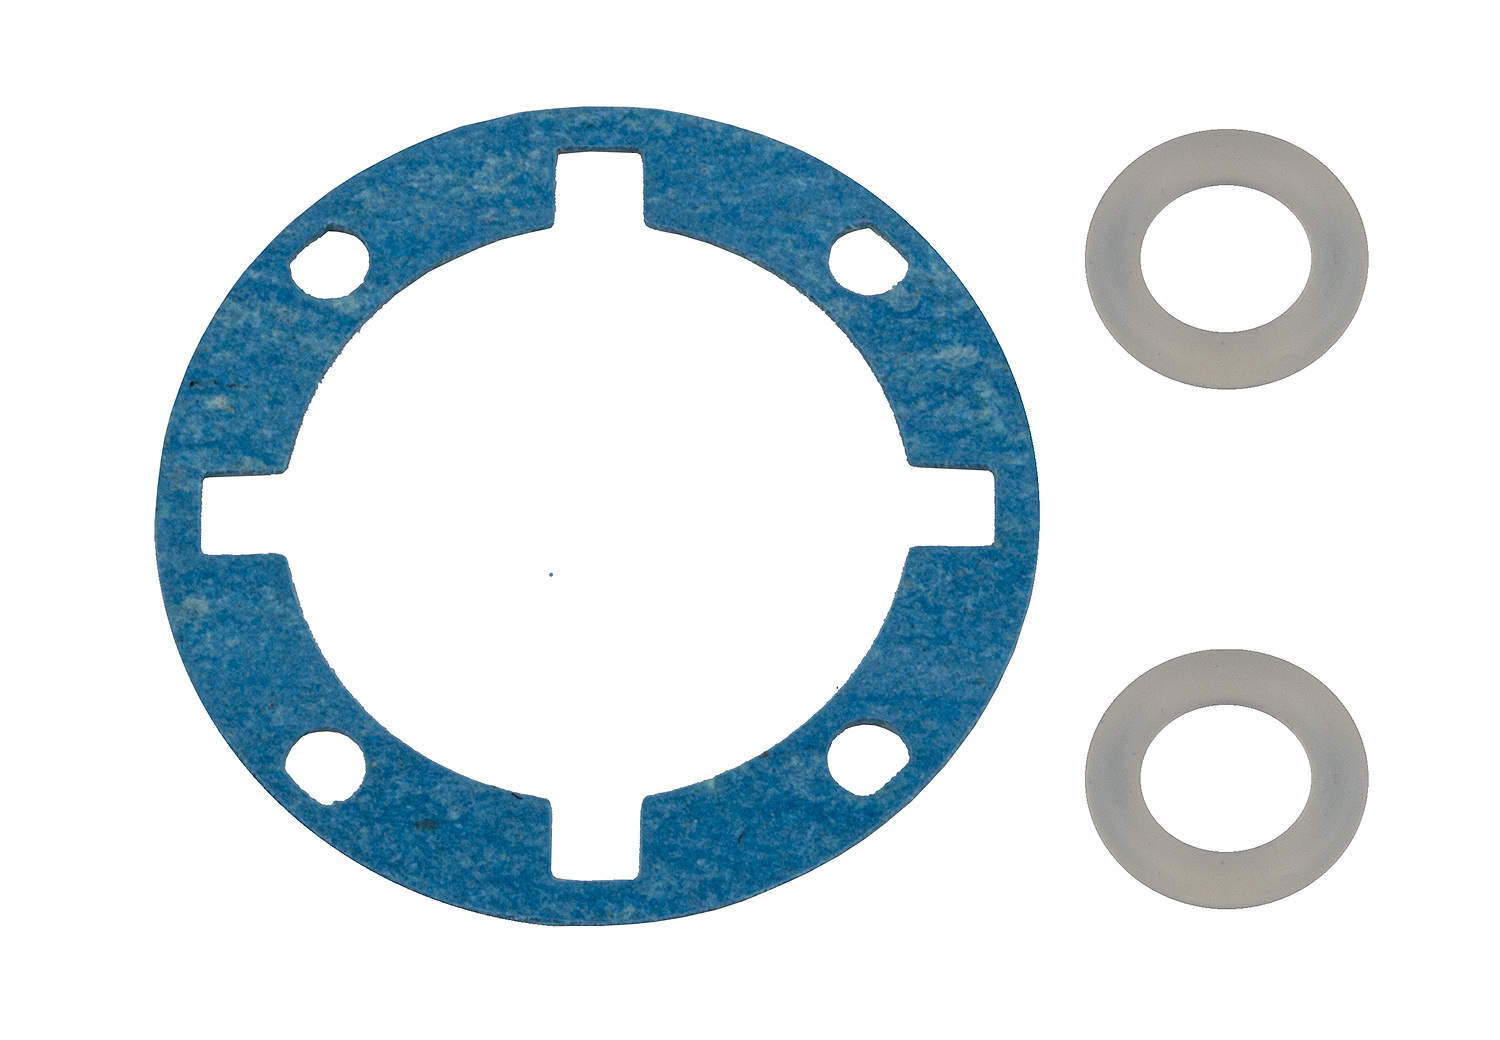 RC10B74 Differential Gasket and O-rings